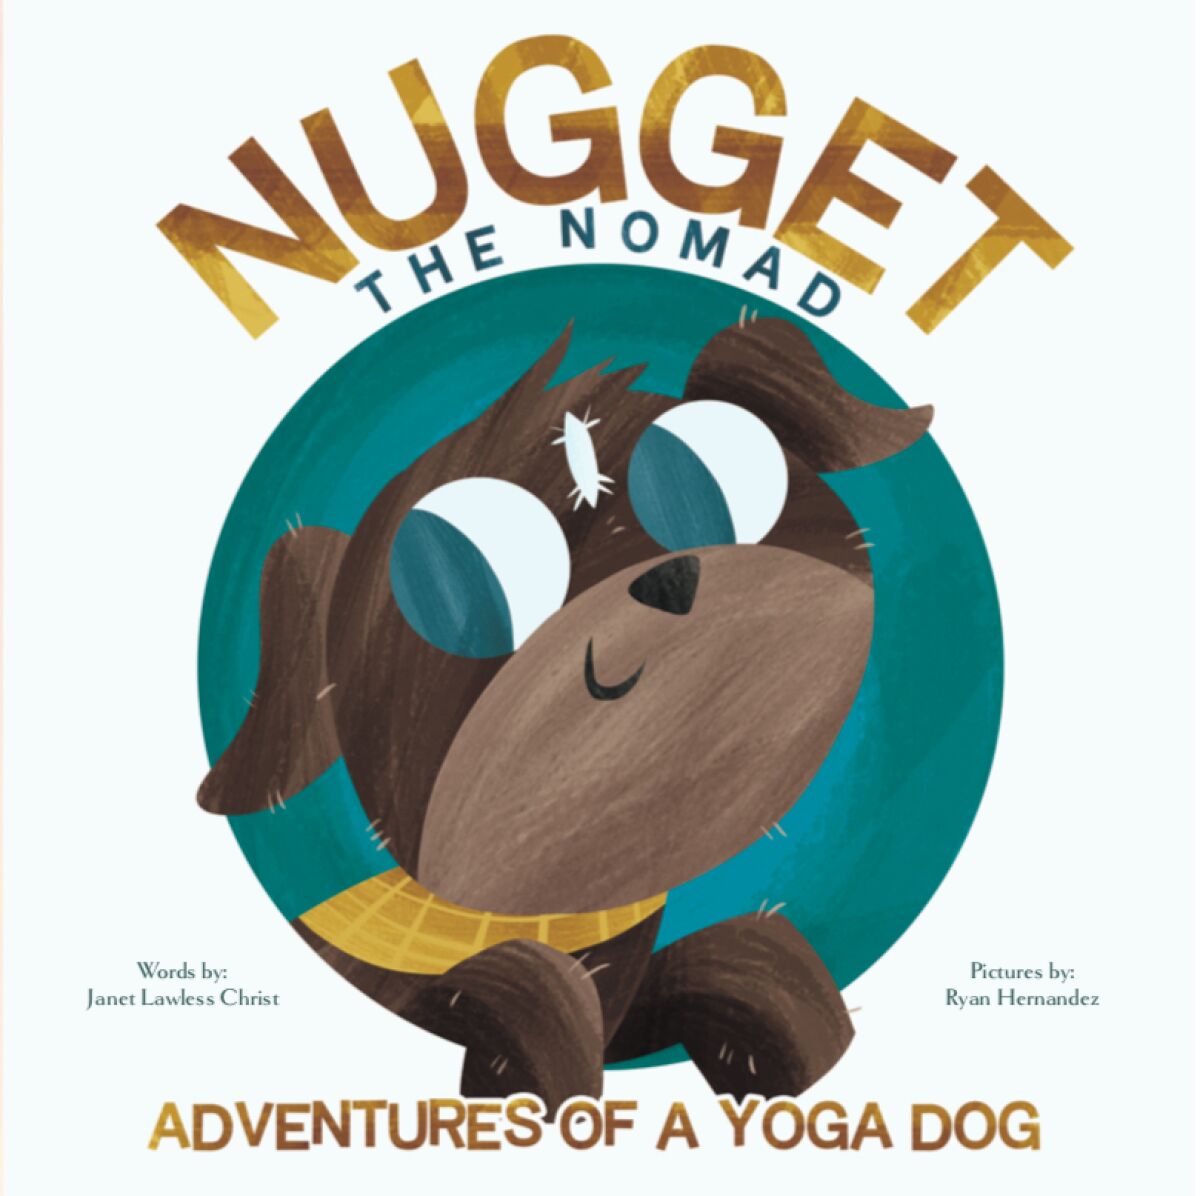 "Nugget the Nomad" was written by Janet Lawless Christ and illustrated by Ryan Hernandez.